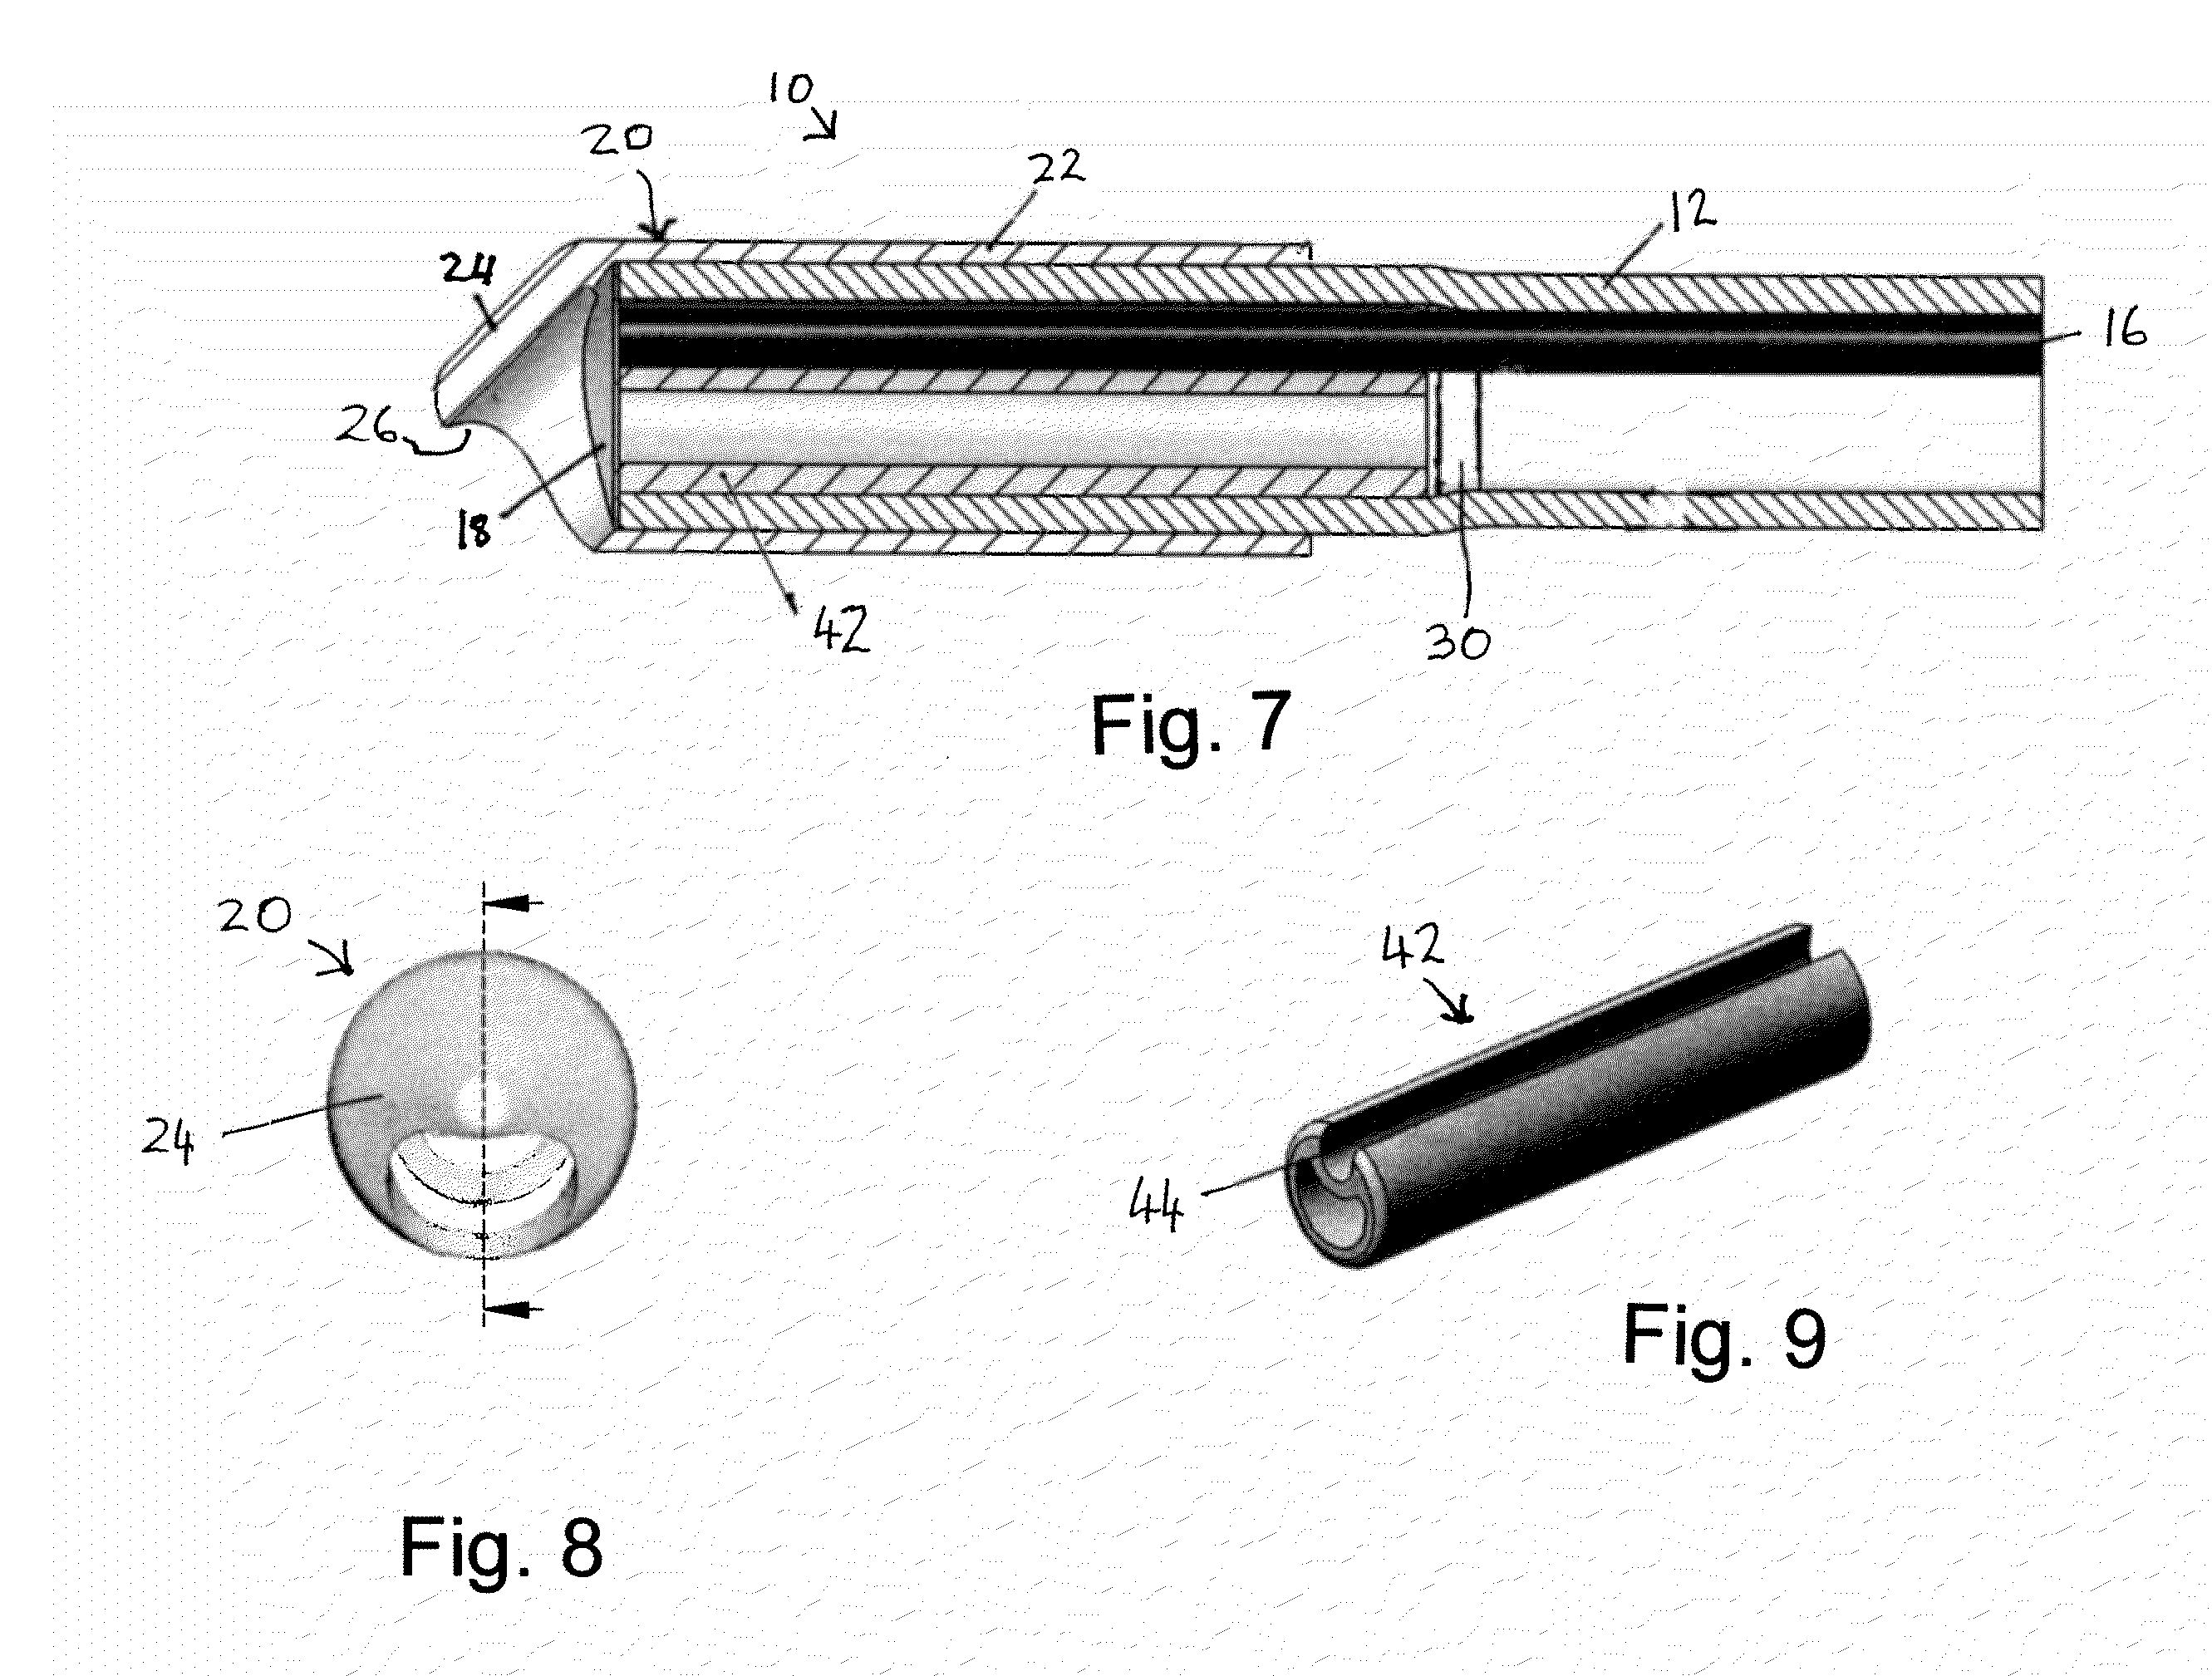 Process and system for treating a vascular occlusion or other endoluminal structure